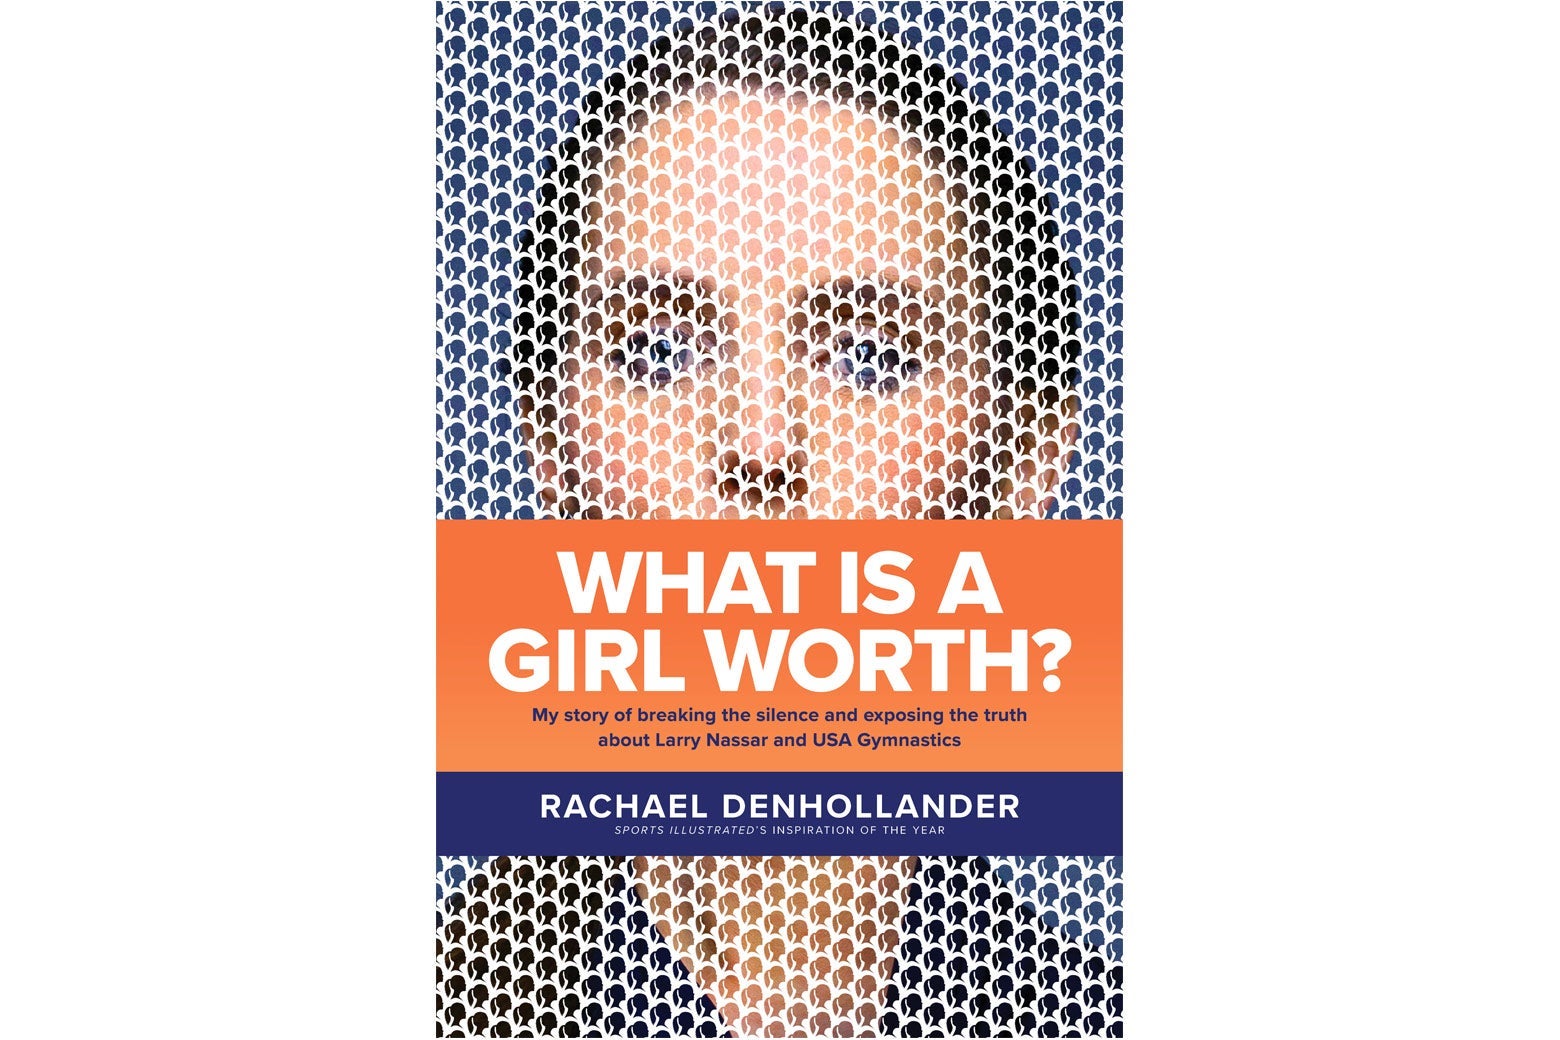 What Is a Girl Worth? by Rachael Denhollander